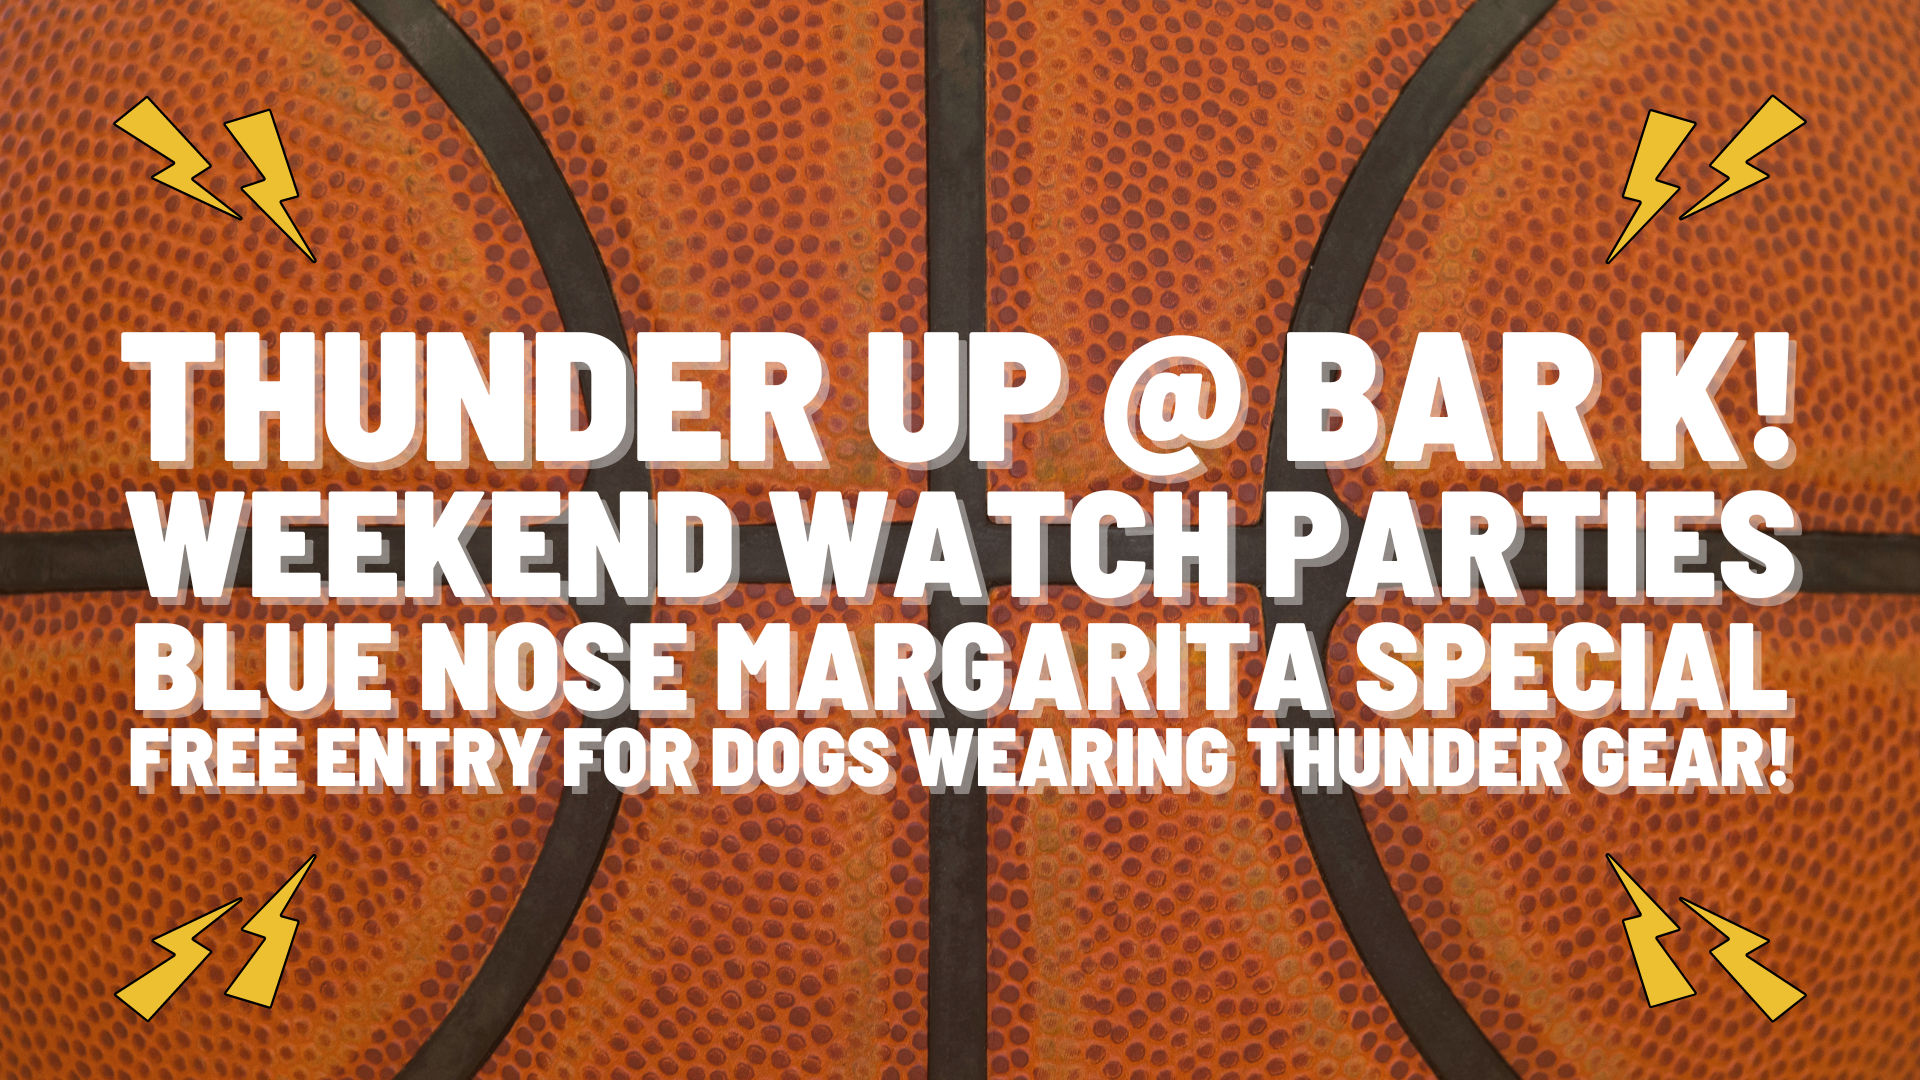 Thunder Up @ Bar K! Weekend watch parties blue nose margarita special free entry for dogs wearing thunder gear